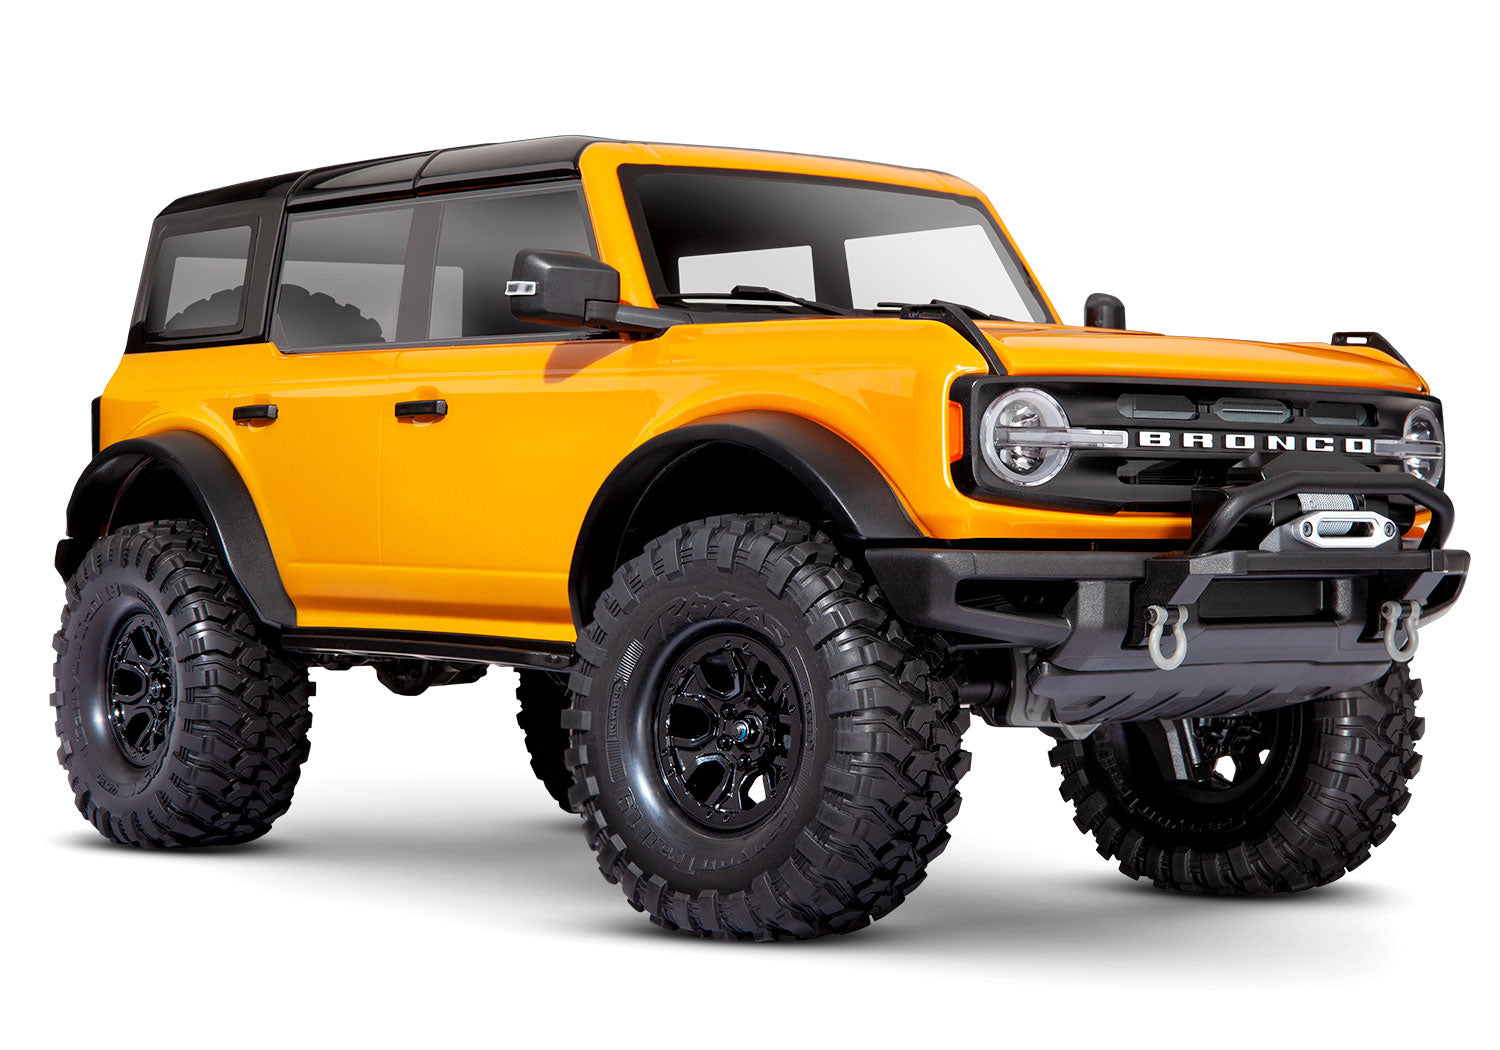 92076-4 ORANGE TRX-4® 1/10 Crawler with Ford® Bronco Body: 4WD Electric Truck with TQi™